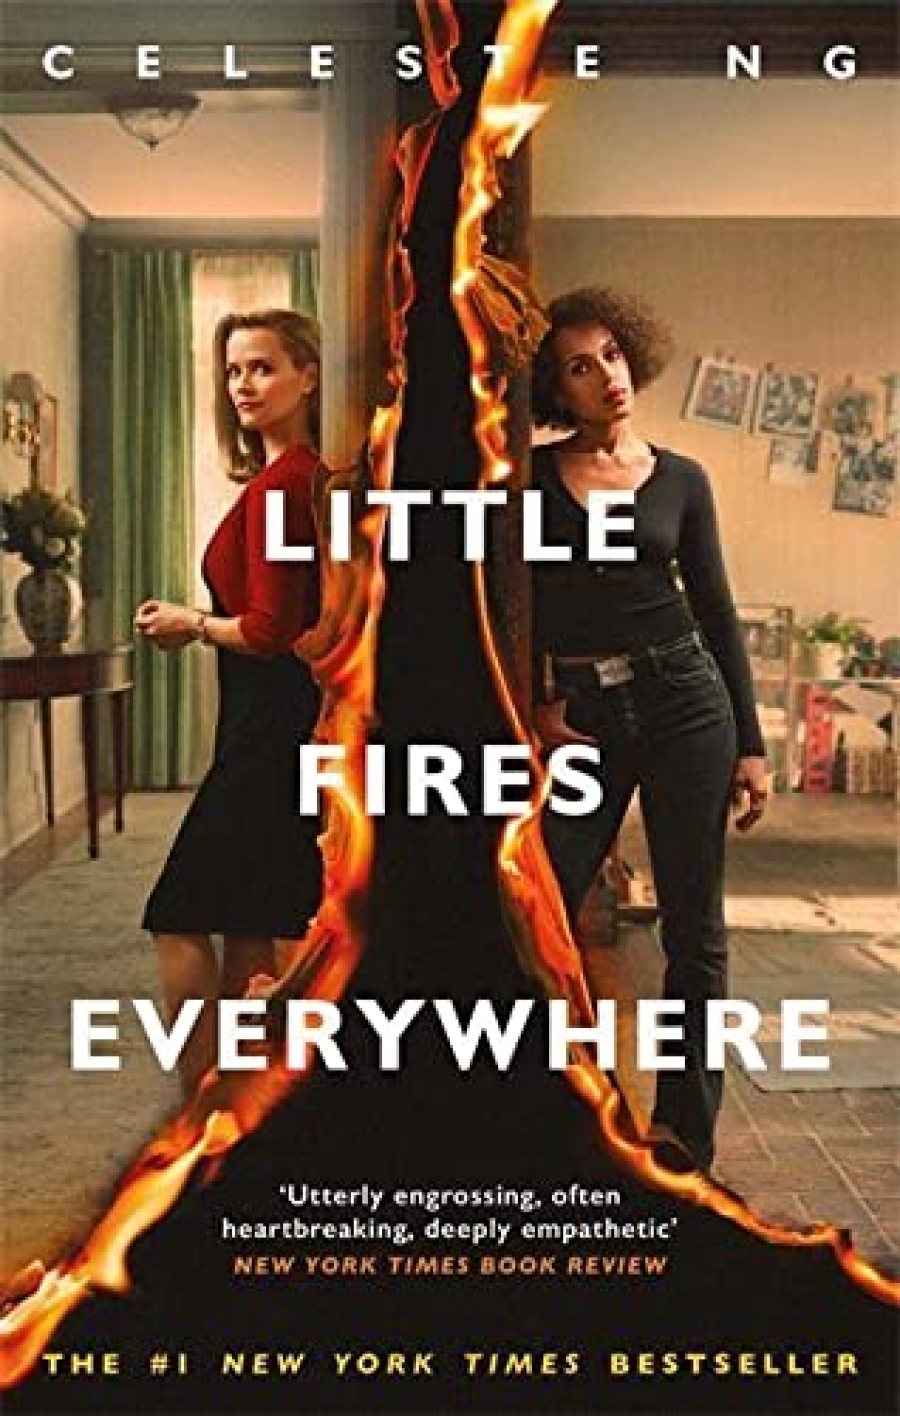 Celeste Ng Little Fires Everywhere: film tie-in 